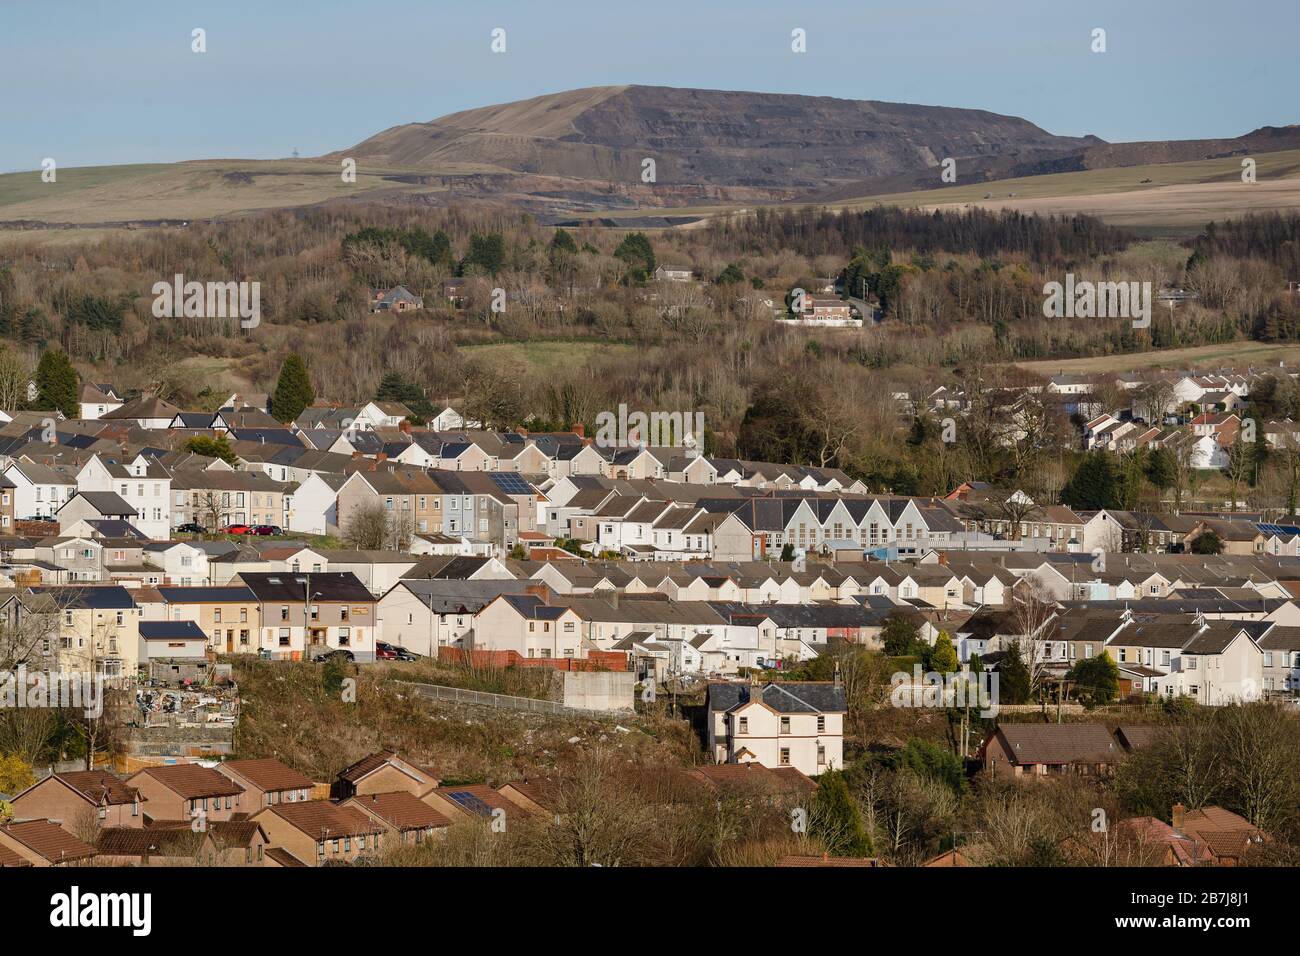 MERTHYR TYDFIL, WALES - 16th March 2020 - Merthyr Tydfil landscape showing terrace housing on a rare sunny day in the Welsh Valleys. Stock Photo